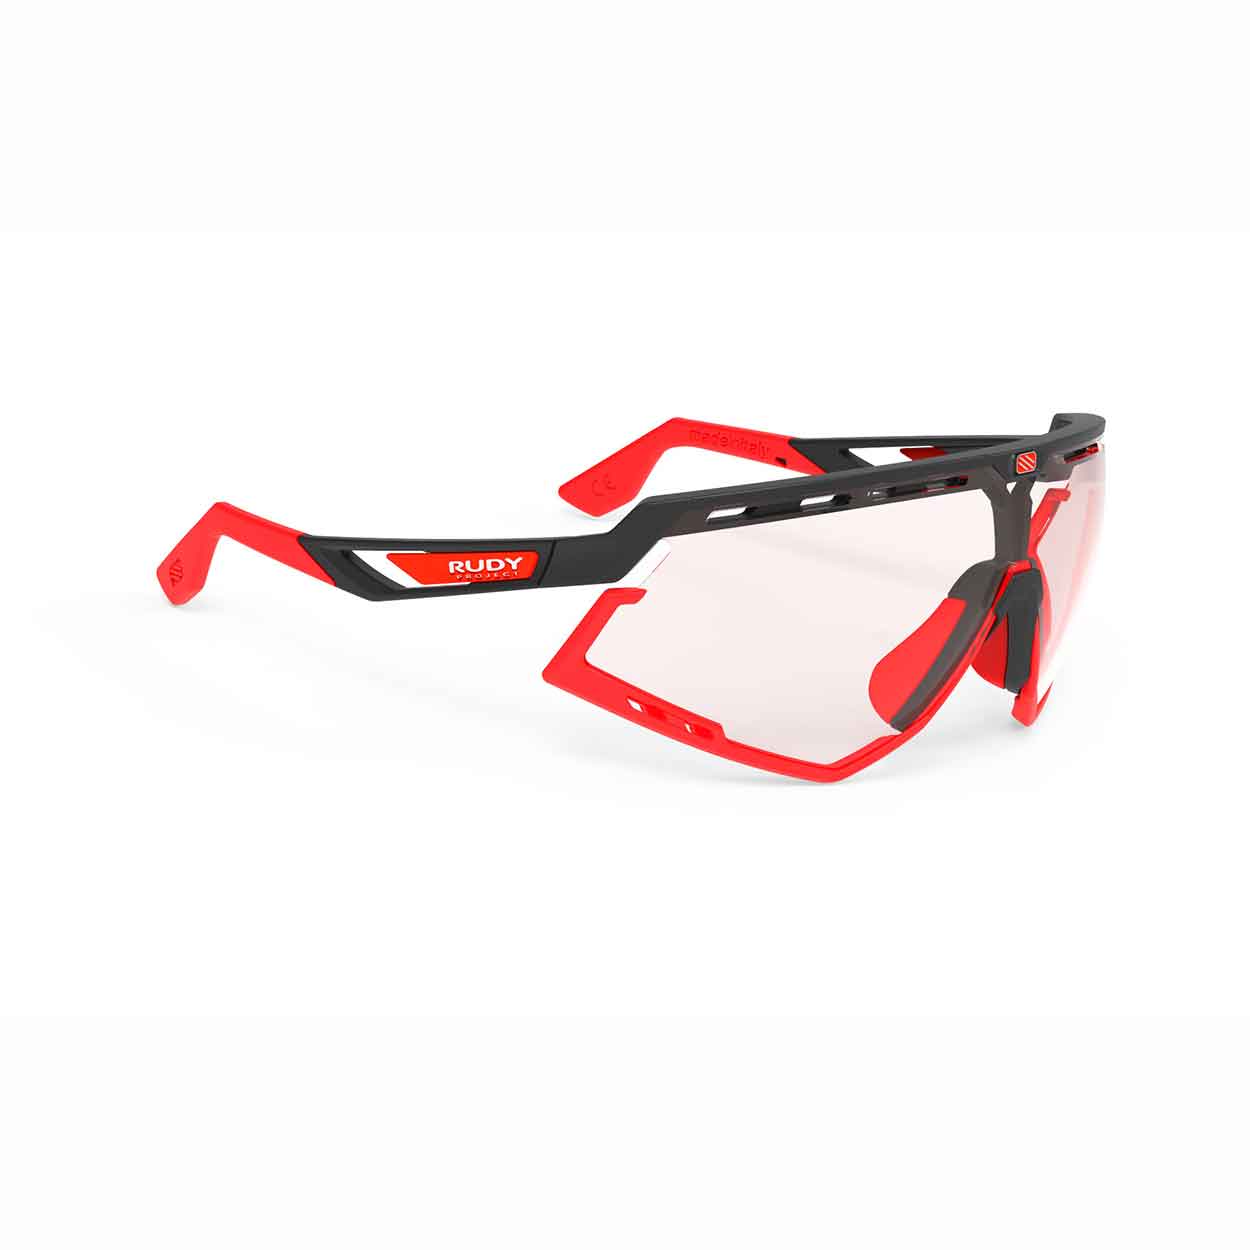 SP527406-0001 Black Matte - Bumpers Red Fluo / ImpactX Photochromic 2 Red